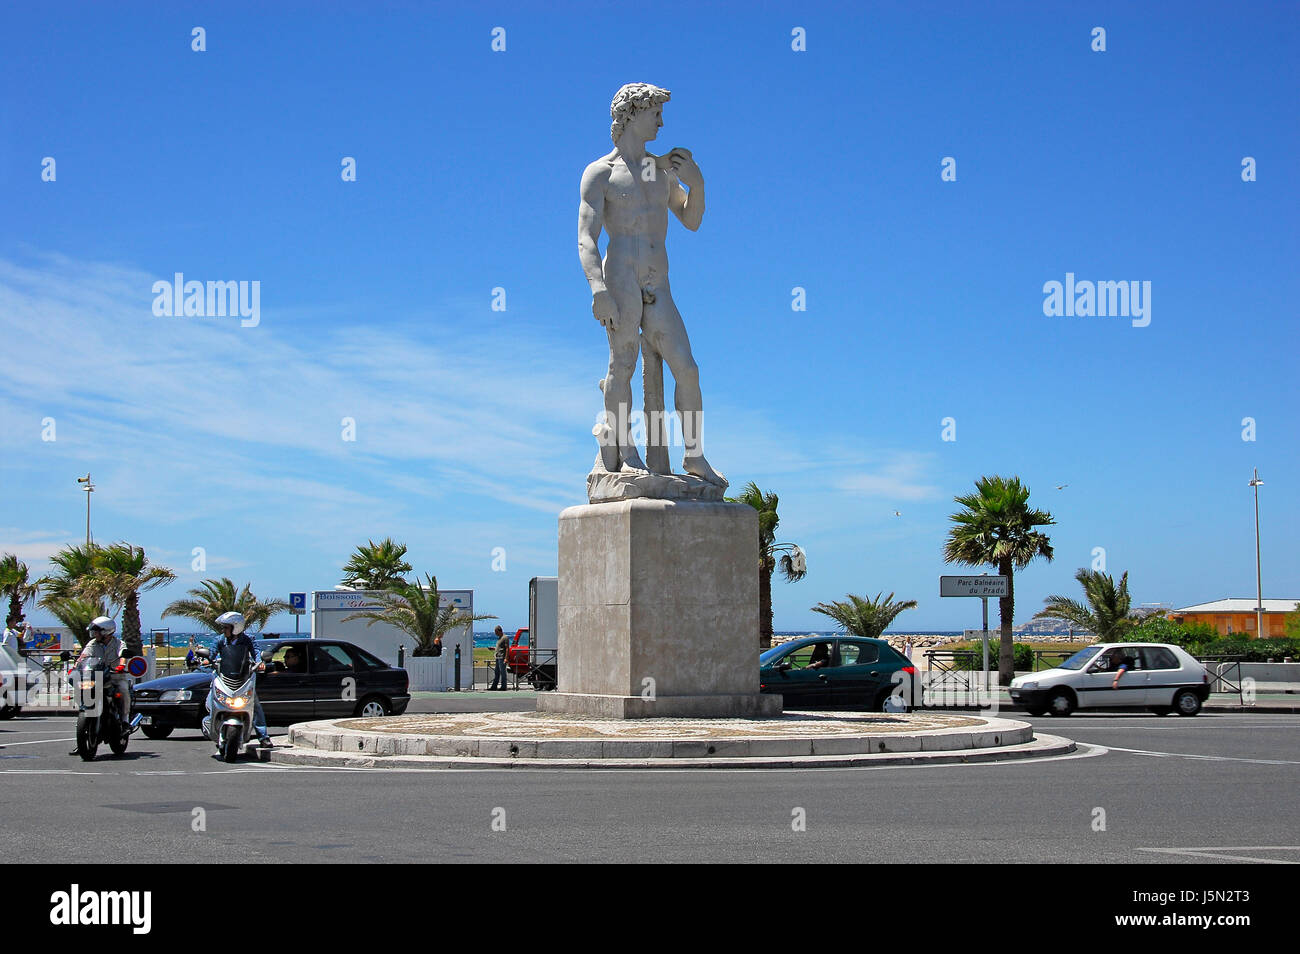 in marseille at the plage de david Stock Photo